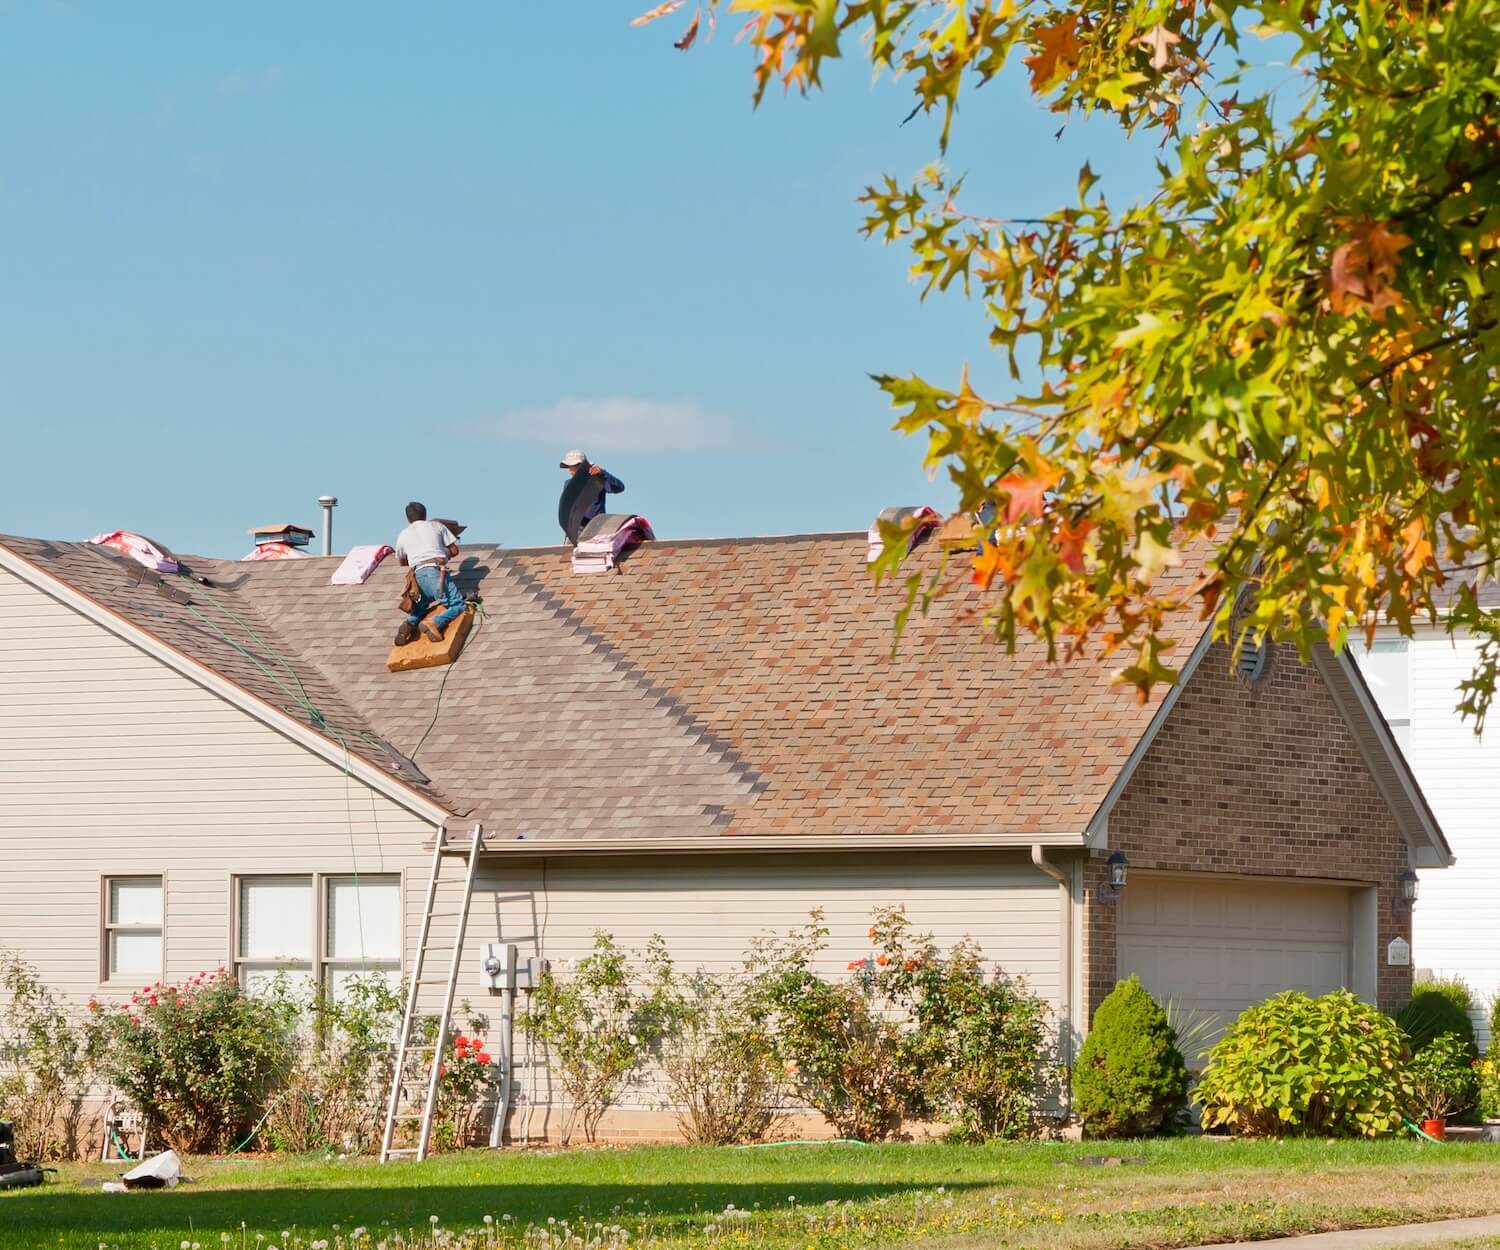 How To Choose A Reliable Roofing Contractor For Summer Projects